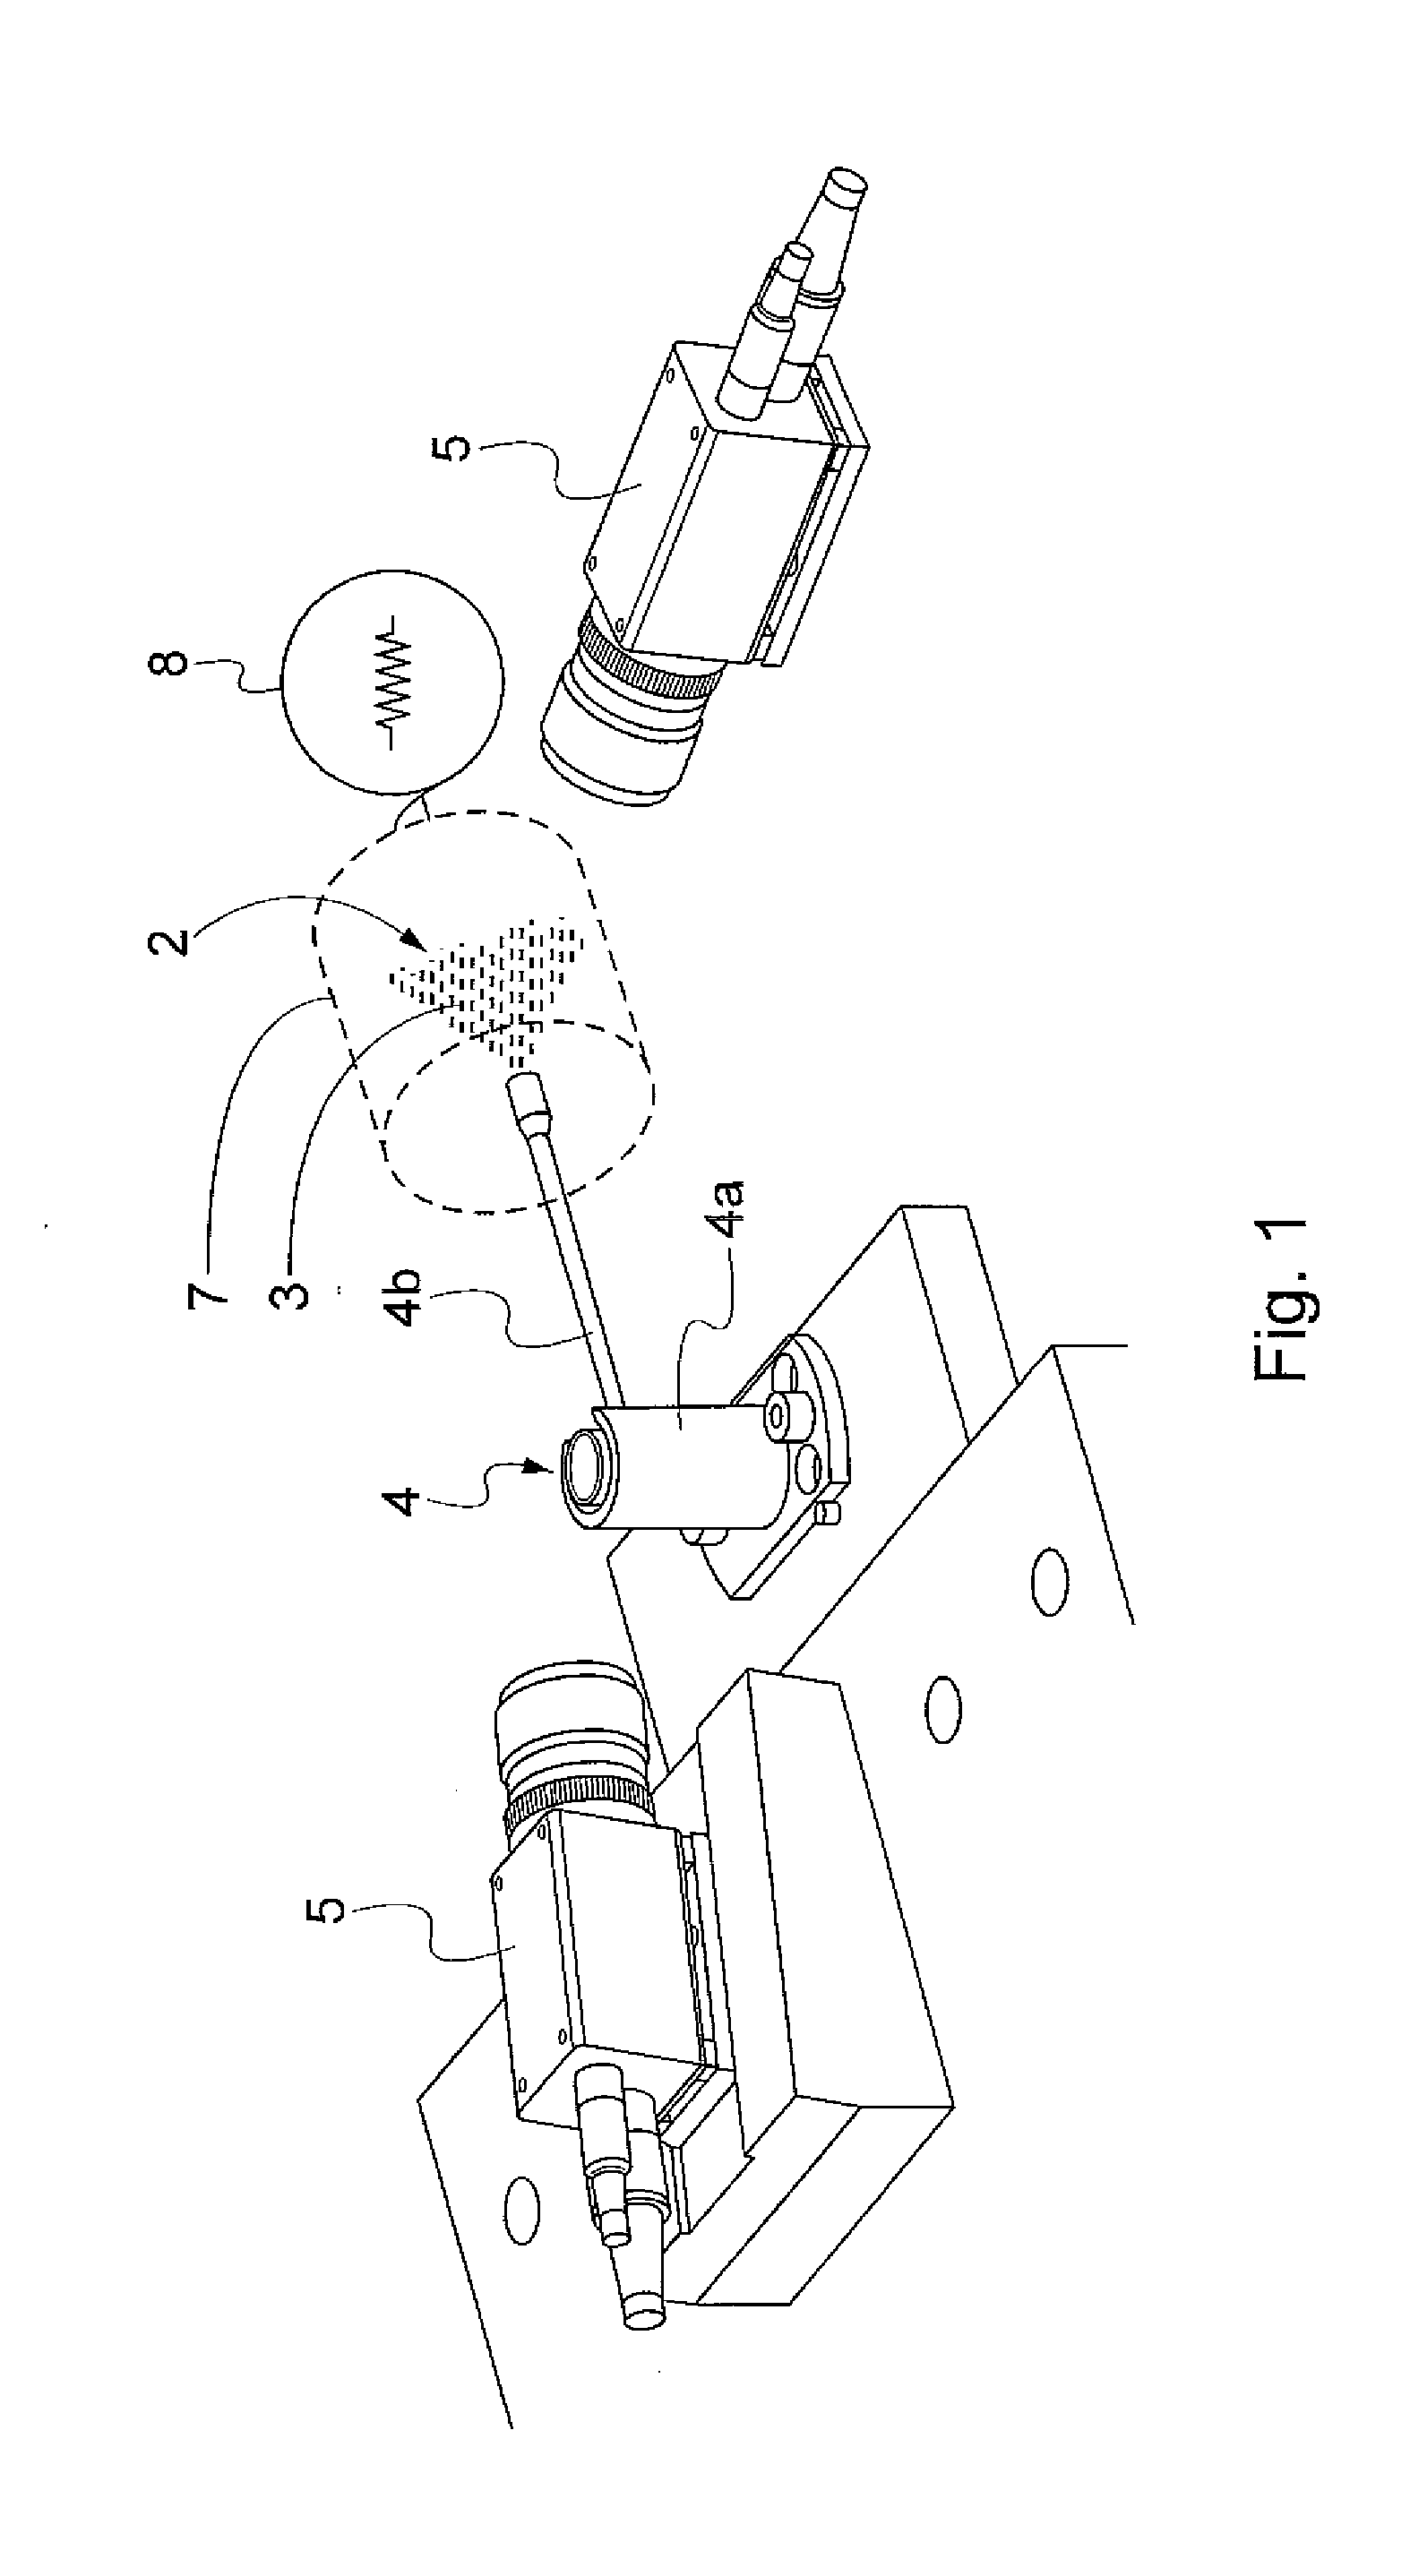 Device for controlling the distribution of fluid ejected from a fluid nebulizing dispenser